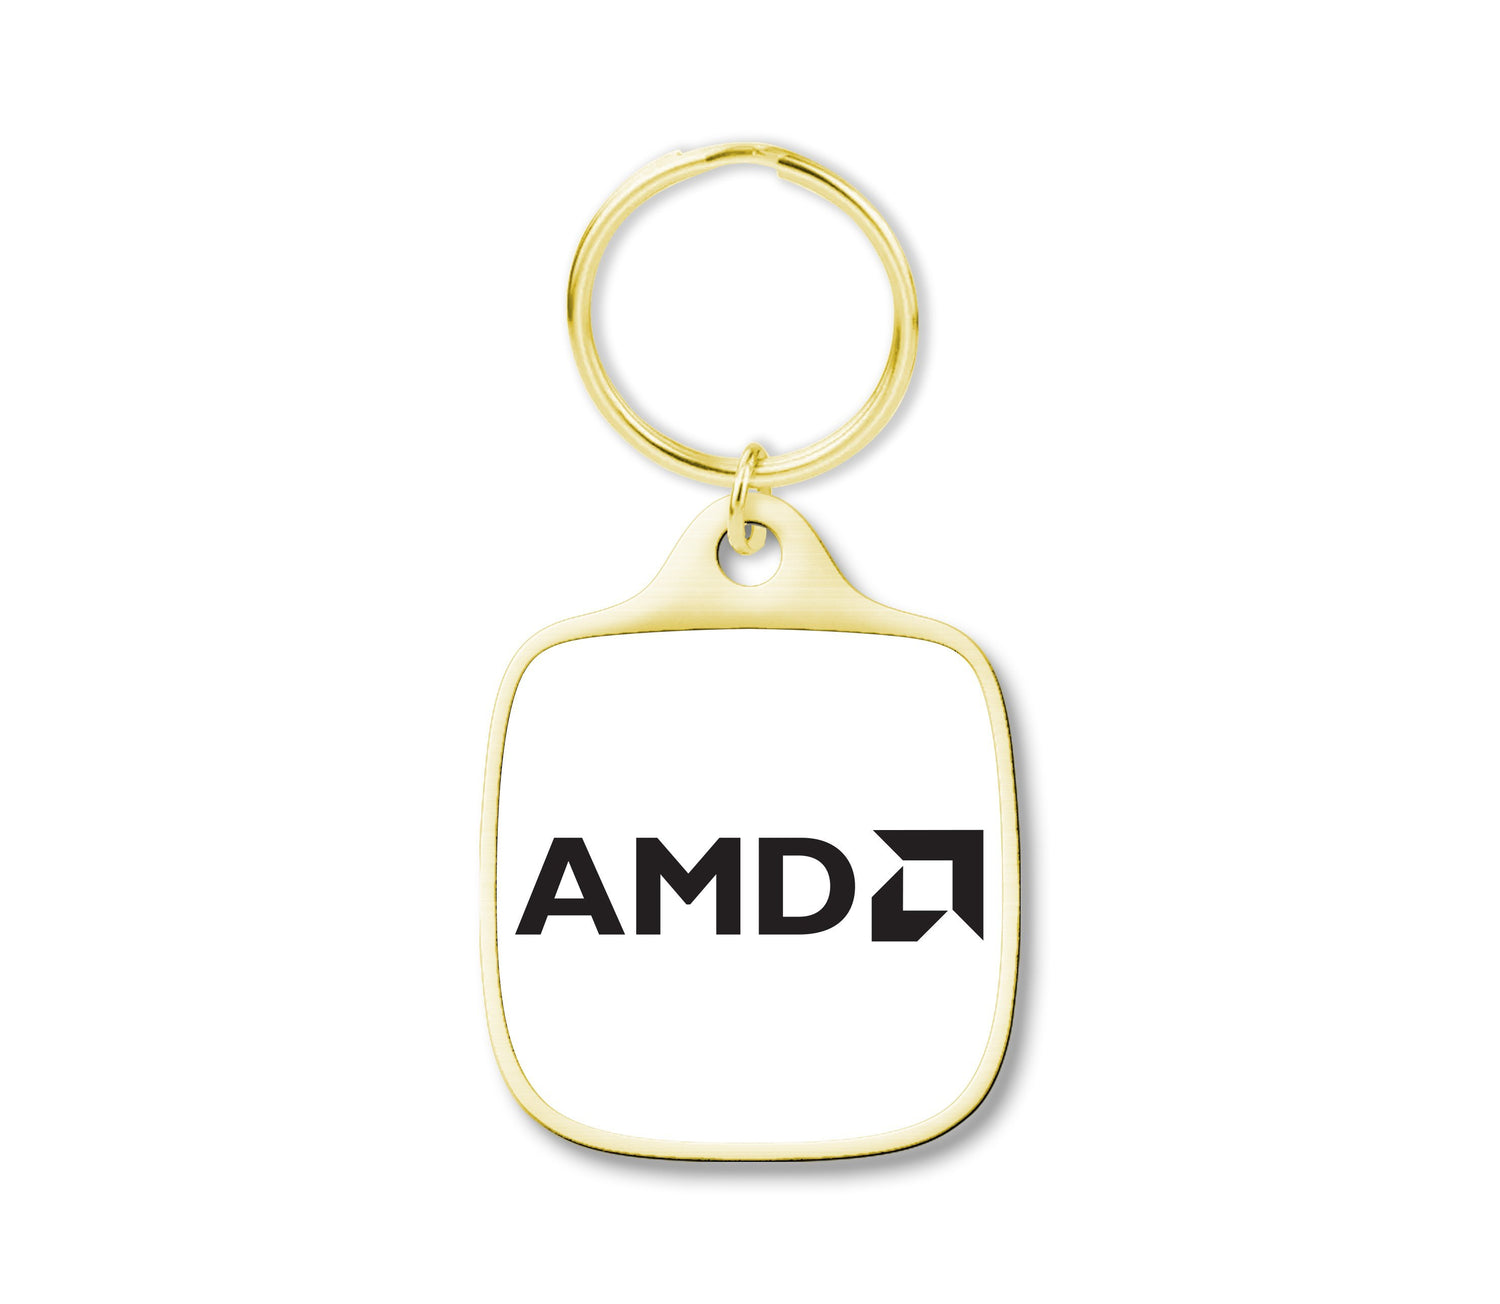 Custom Digitally Printed Made in USA Keychains Rounded Square 1.3 in. Gold 